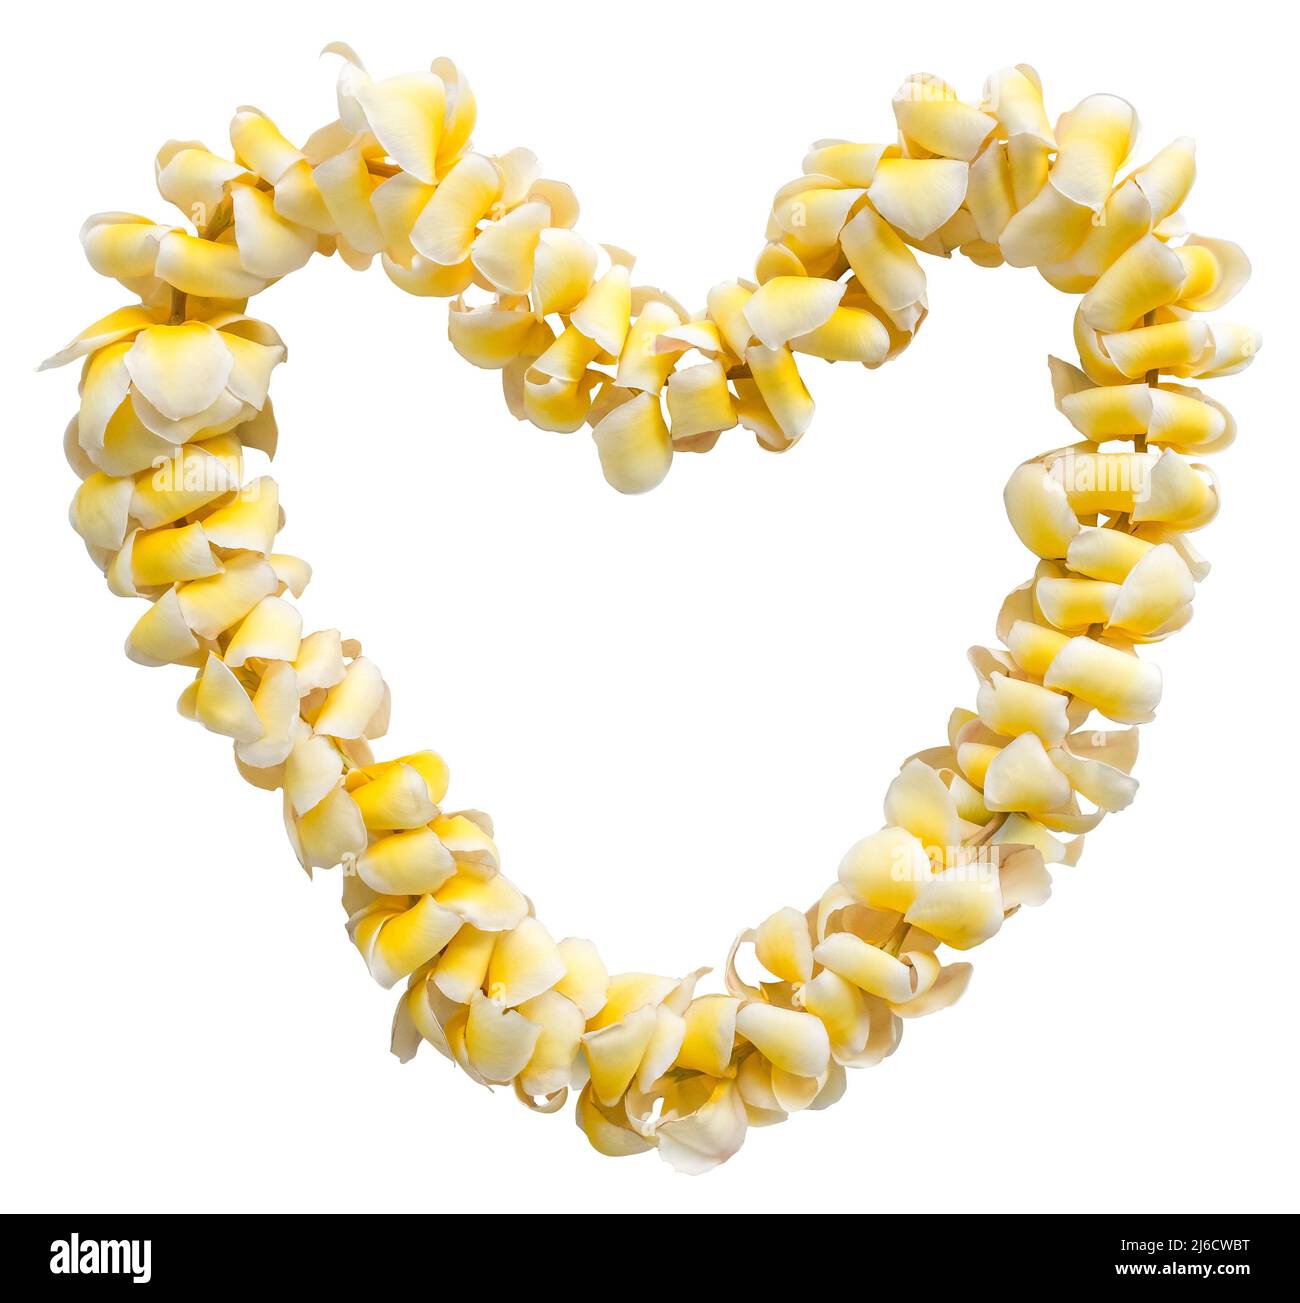 Isolated Romantic Heart-Shaped Hawaiian Lei (Garland of Flowers), On A White Background Stock Photo